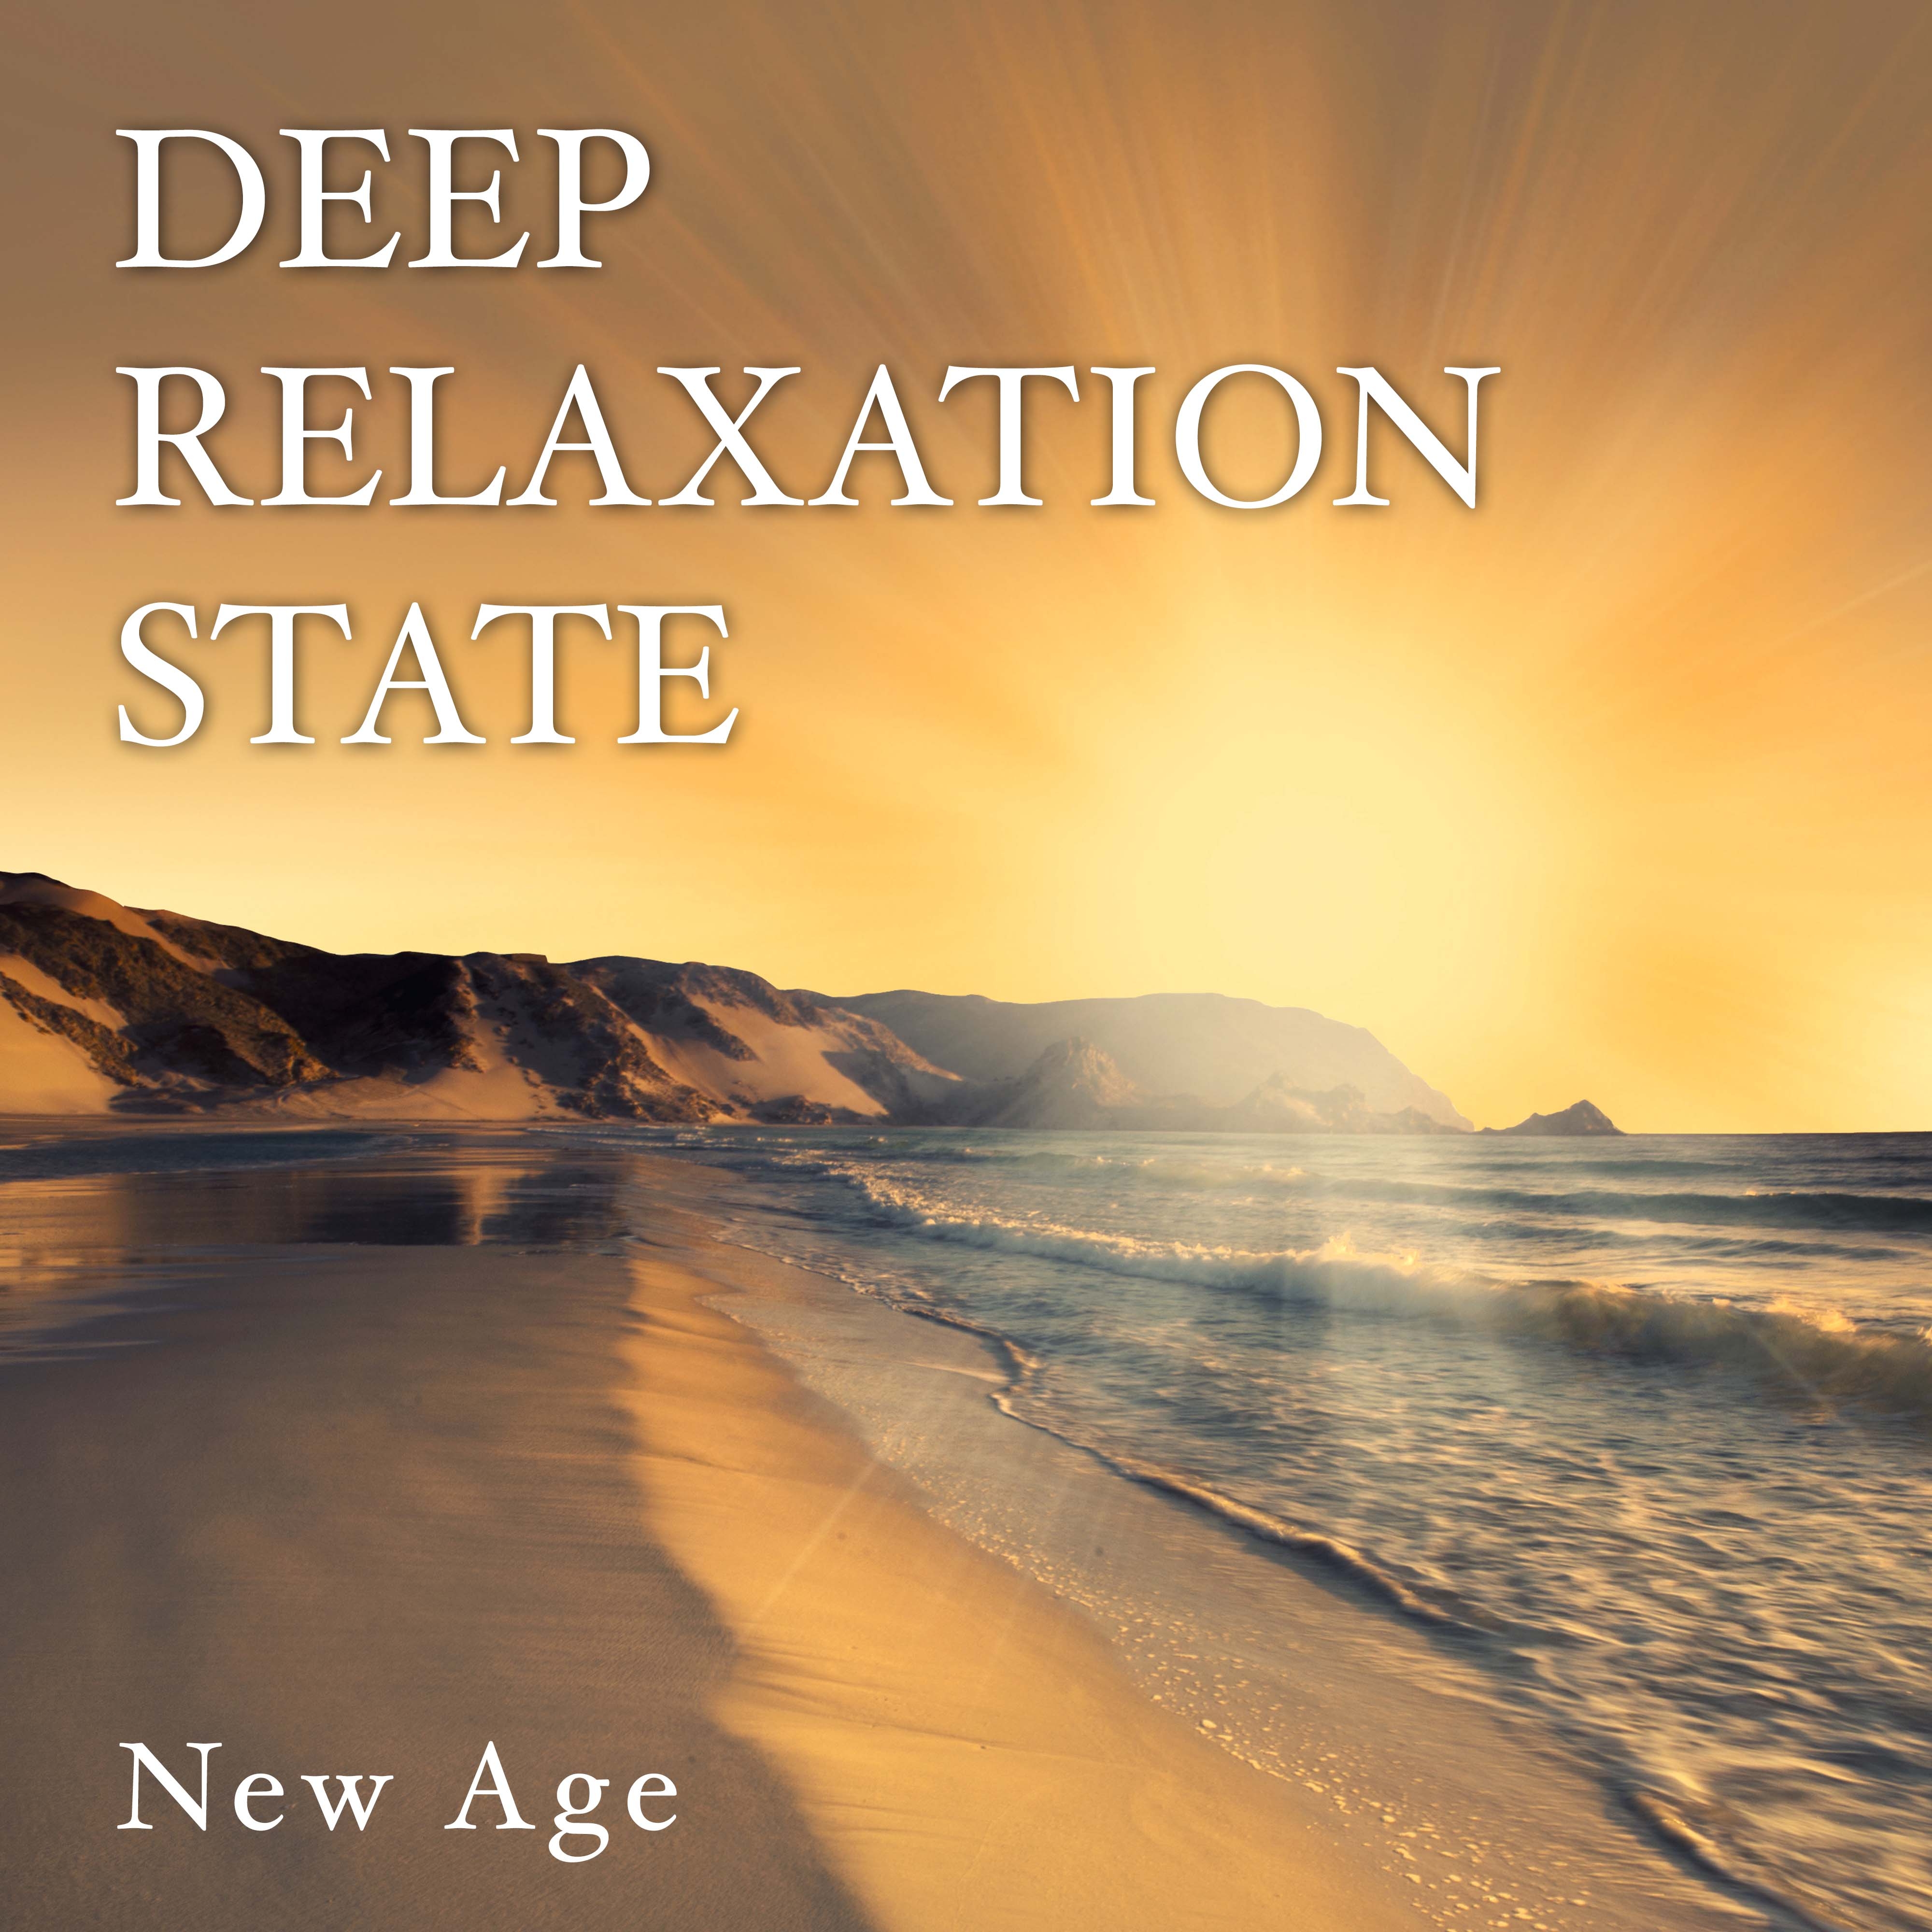 Deep Relaxation State - Relaxing Music to Gain Insight and Inner Peace